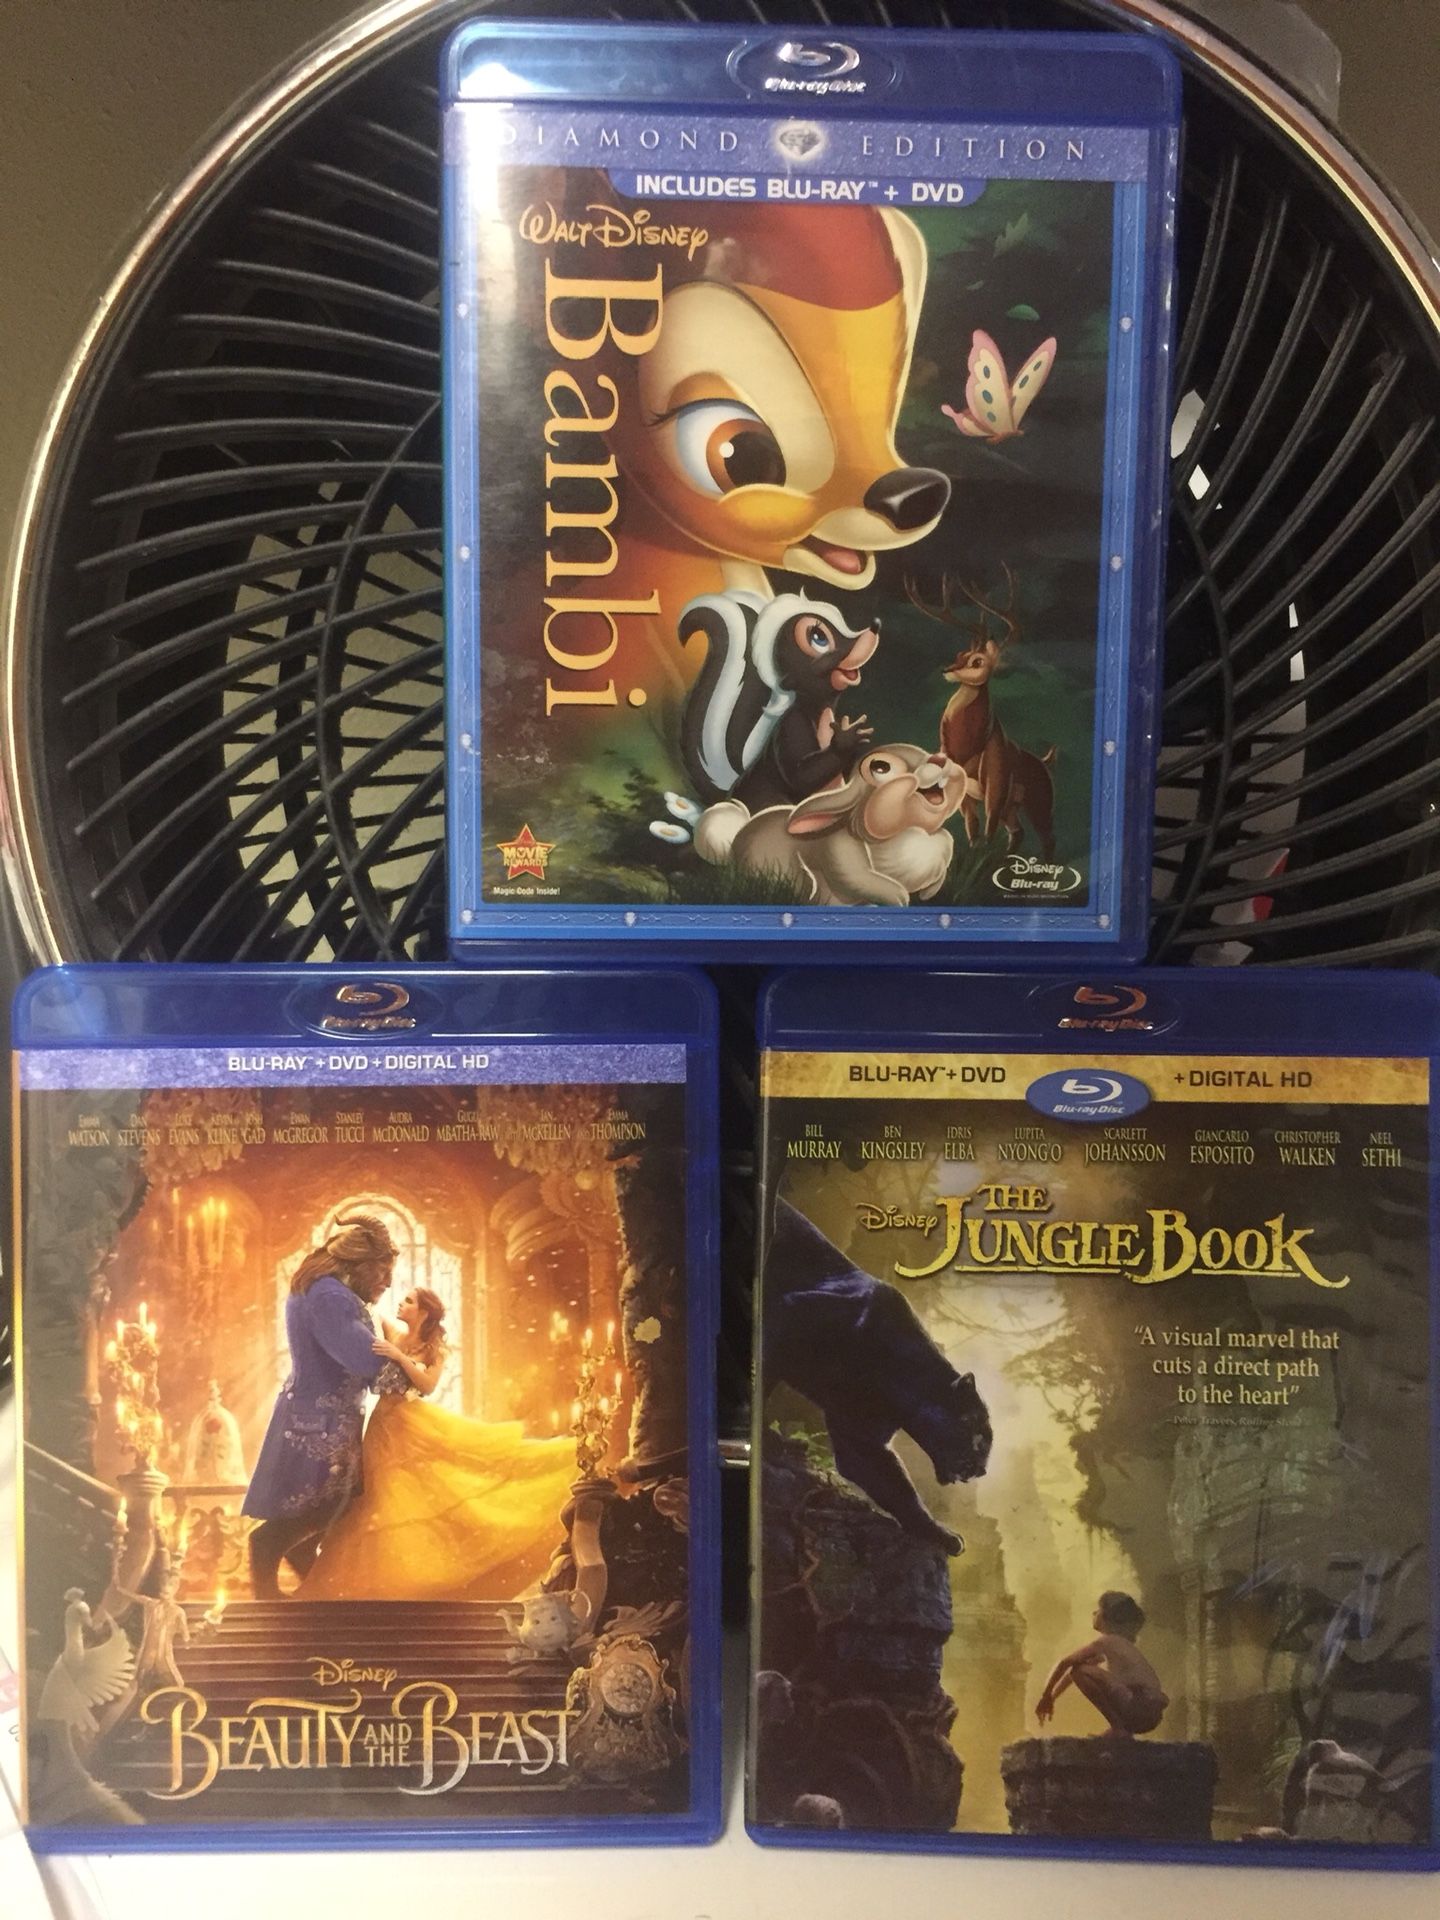 Disney Blu ray DVD combo set! Beauty and the Beast, Bambi, The Jungle Book Live action